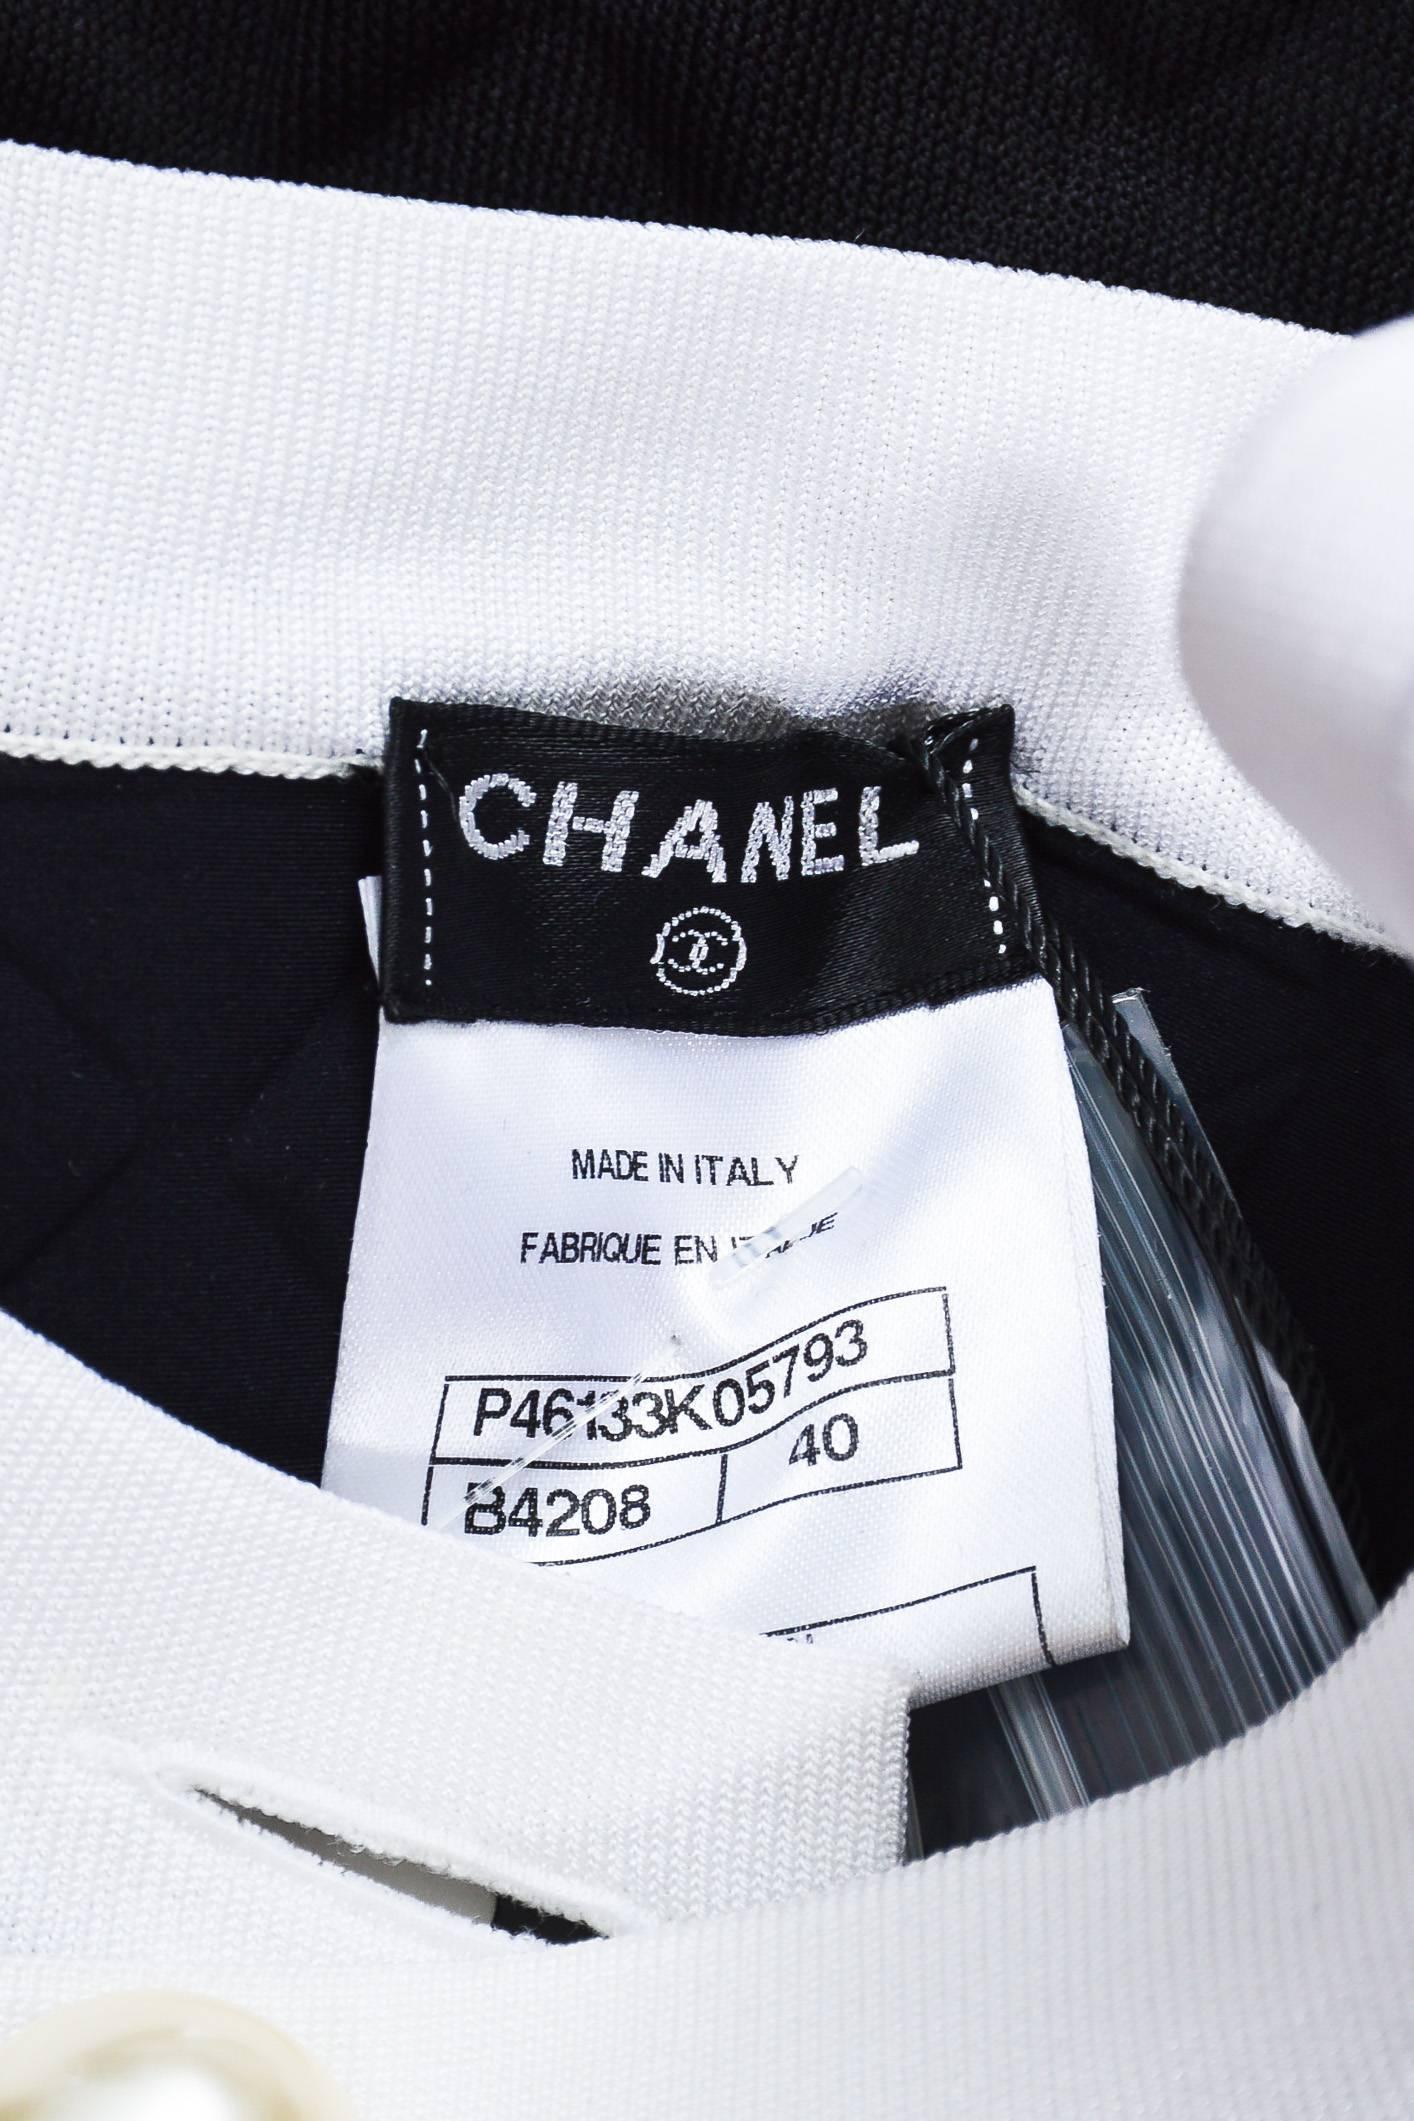 Chanel New With Tag $4245 Black White Textured Faux Pearl Button LS Jacket SZ 40 For Sale 1